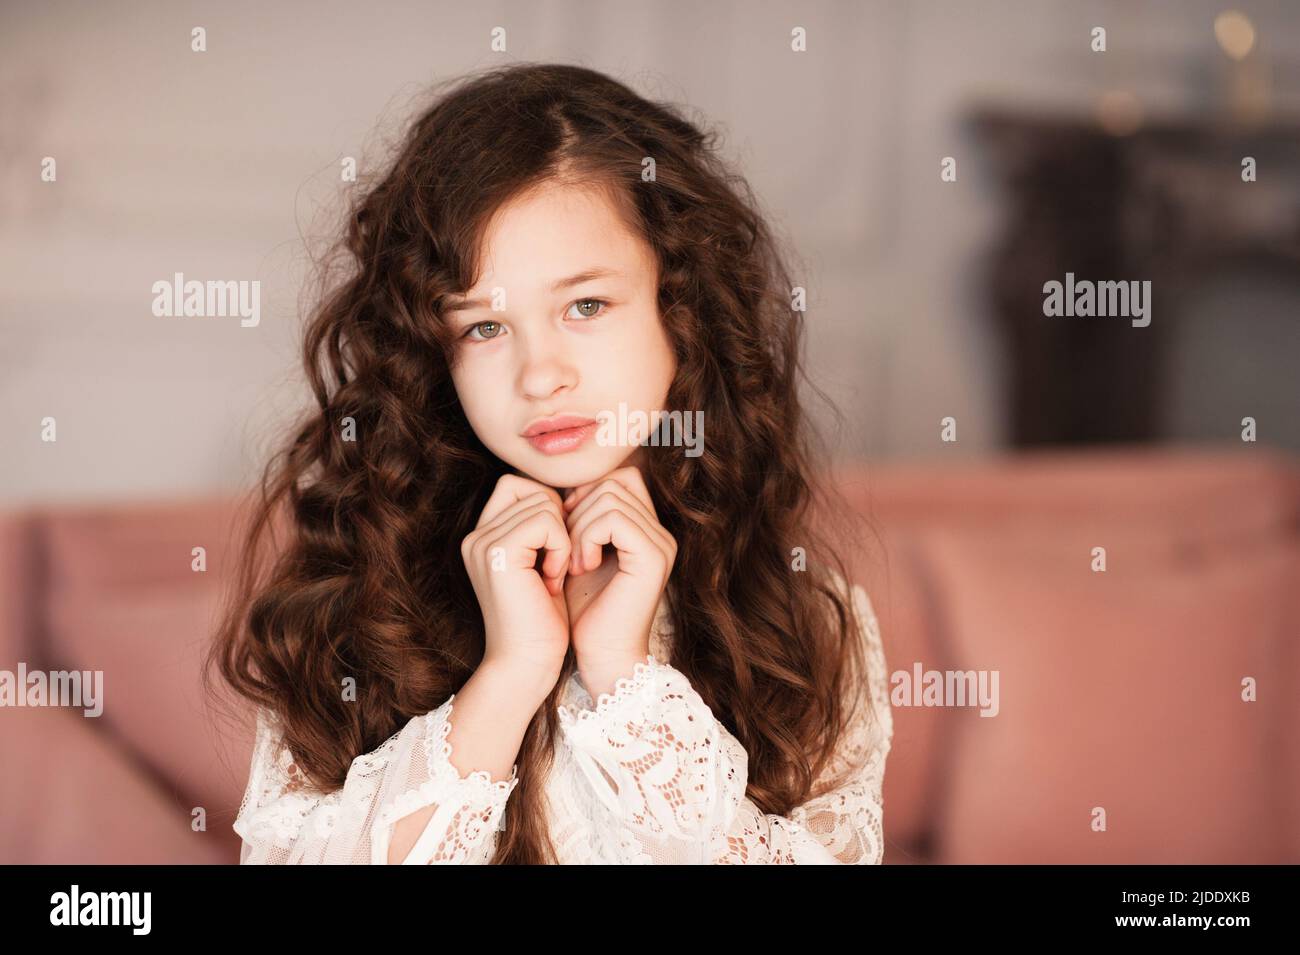 Cute beautiful kid girl 10-12 year old with long dark blonde hair in room close up. Portrait of young teenager. Childhood. Stock Photo